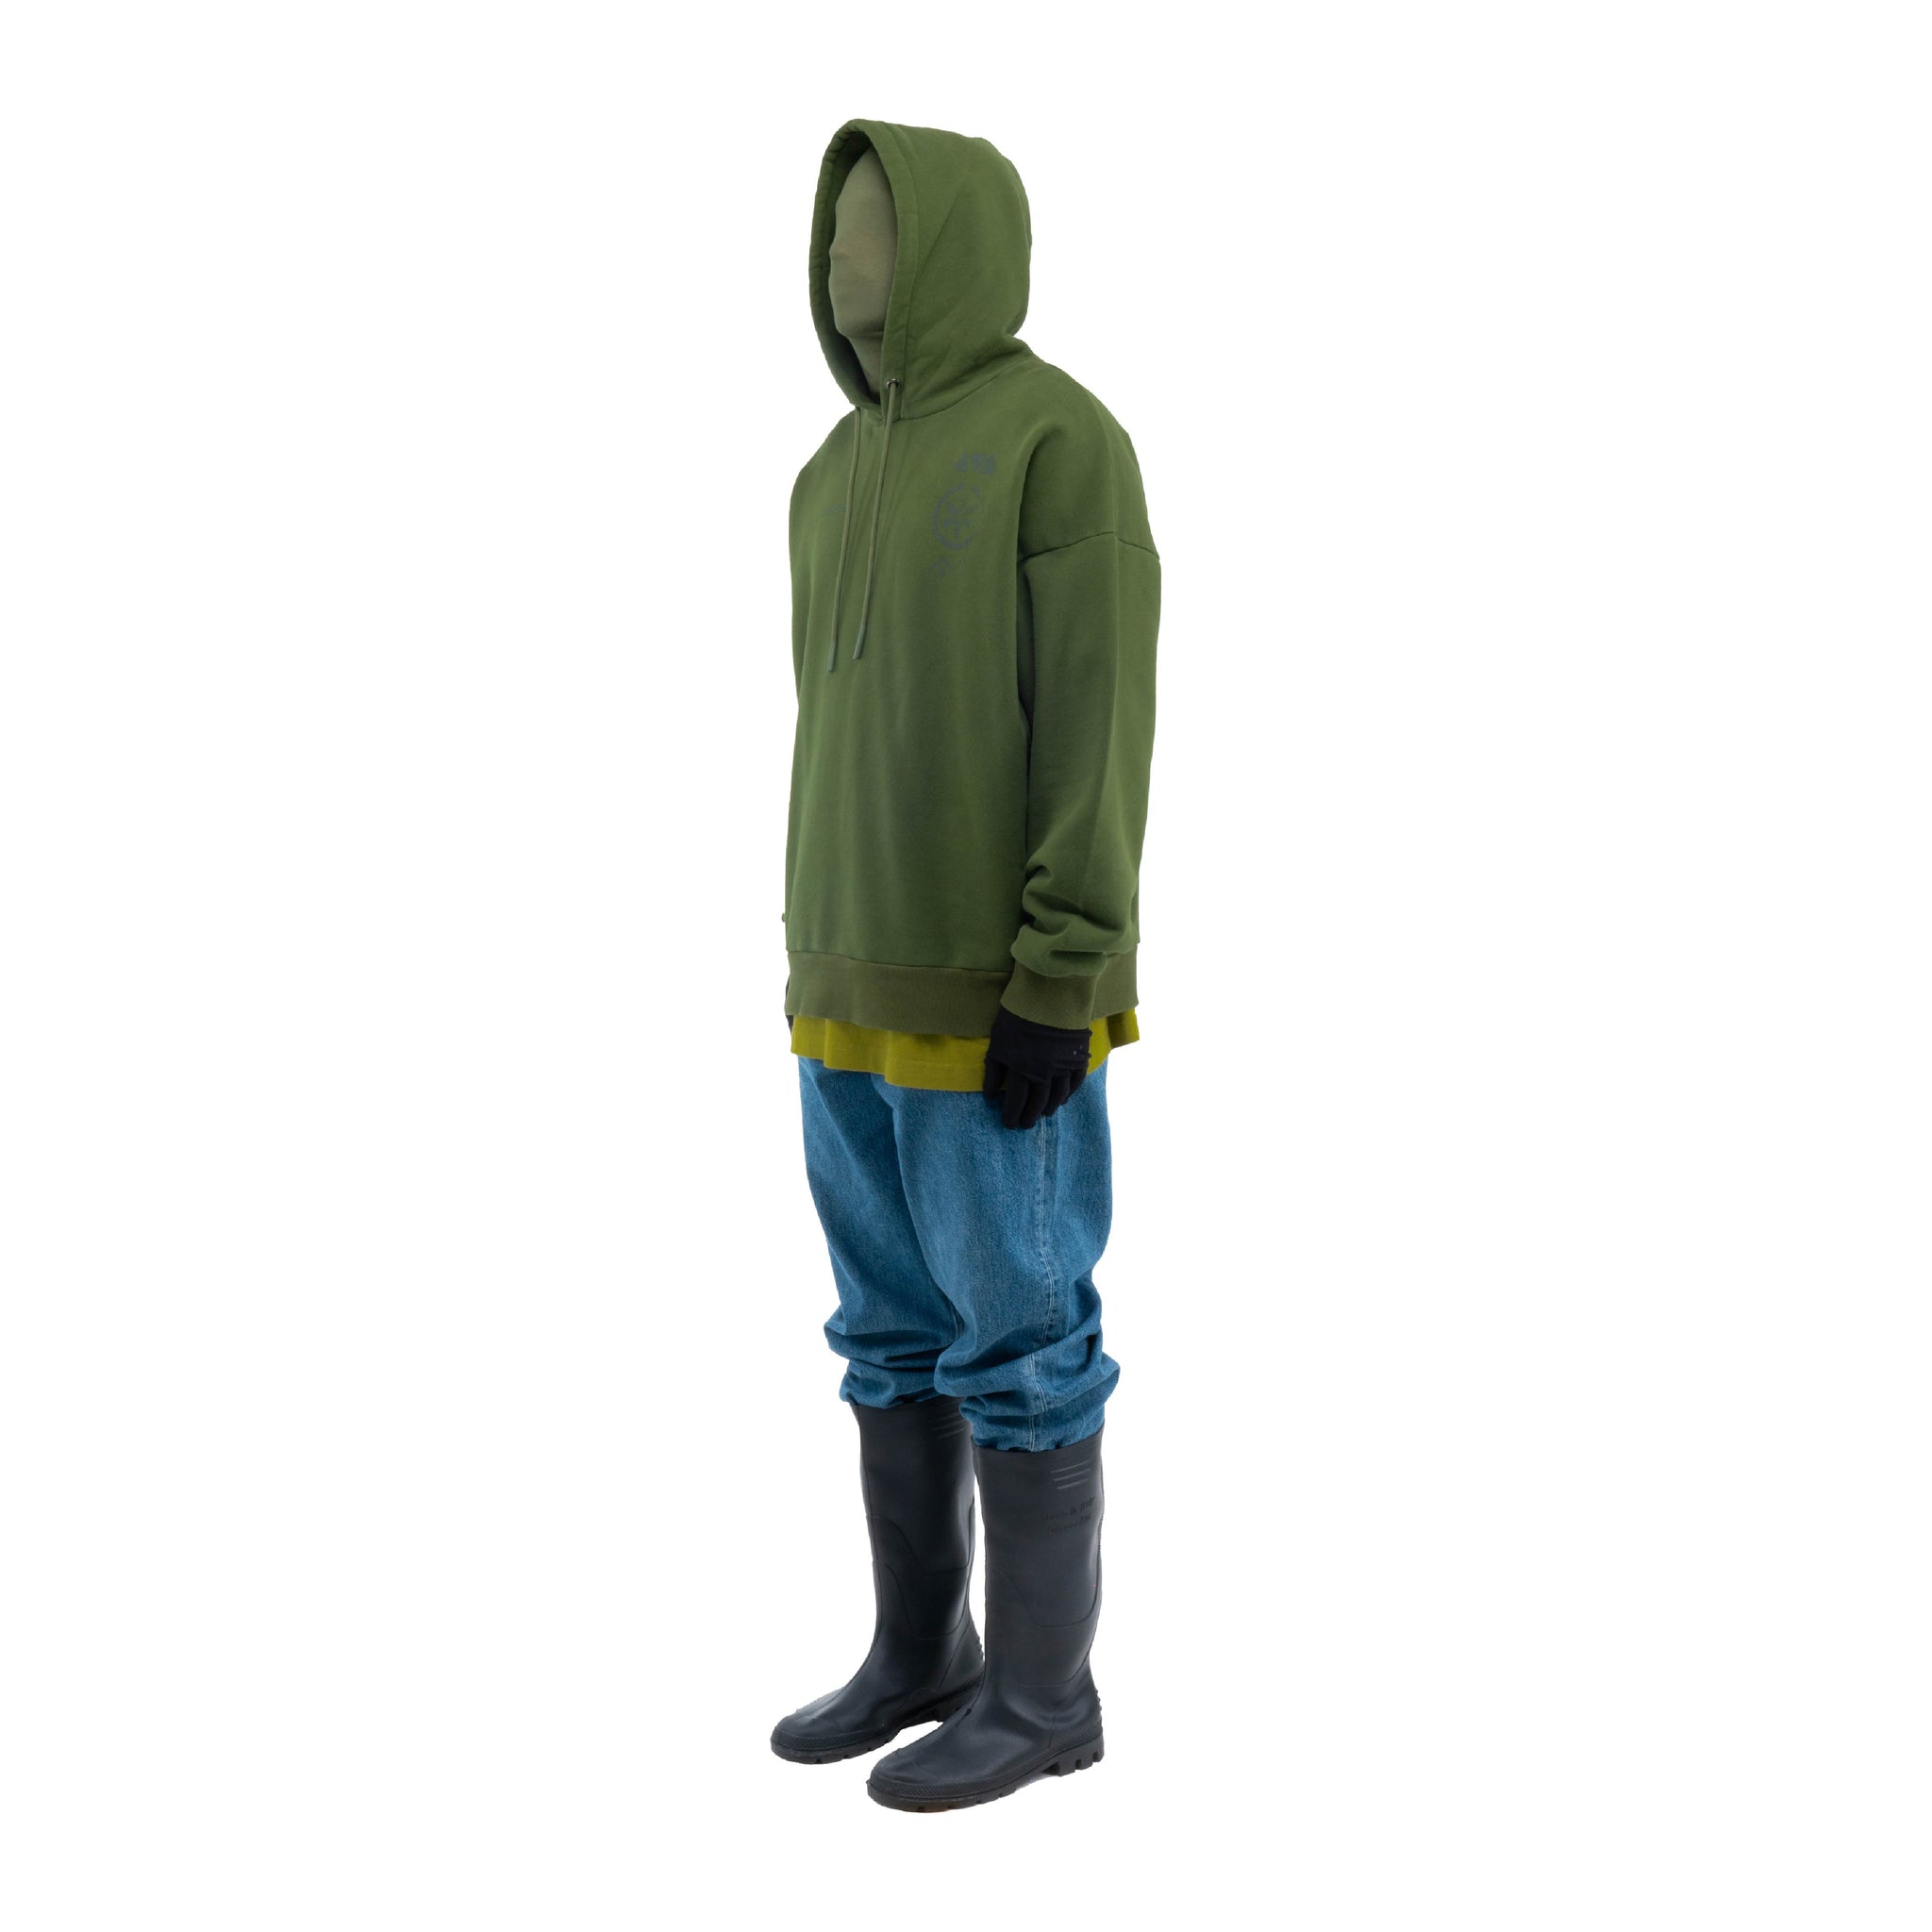 AT-TURAIF OVERSIZED HOODIE - GREEN